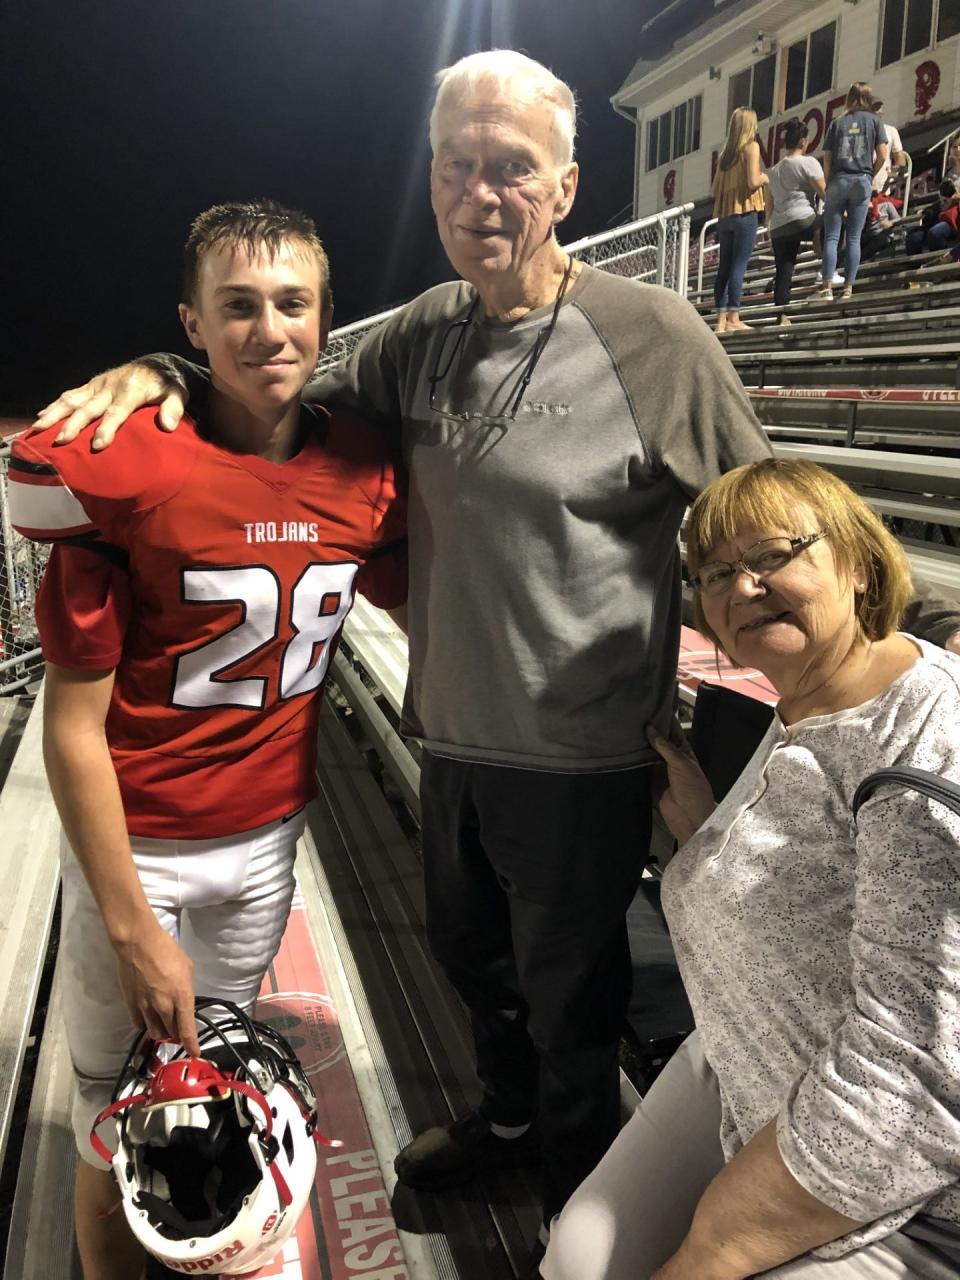 Camden Schmidt is shown at the final Monroe High School home football game of last season. He is pictured with his grandparents, Robert and Linda Kuehnlein.